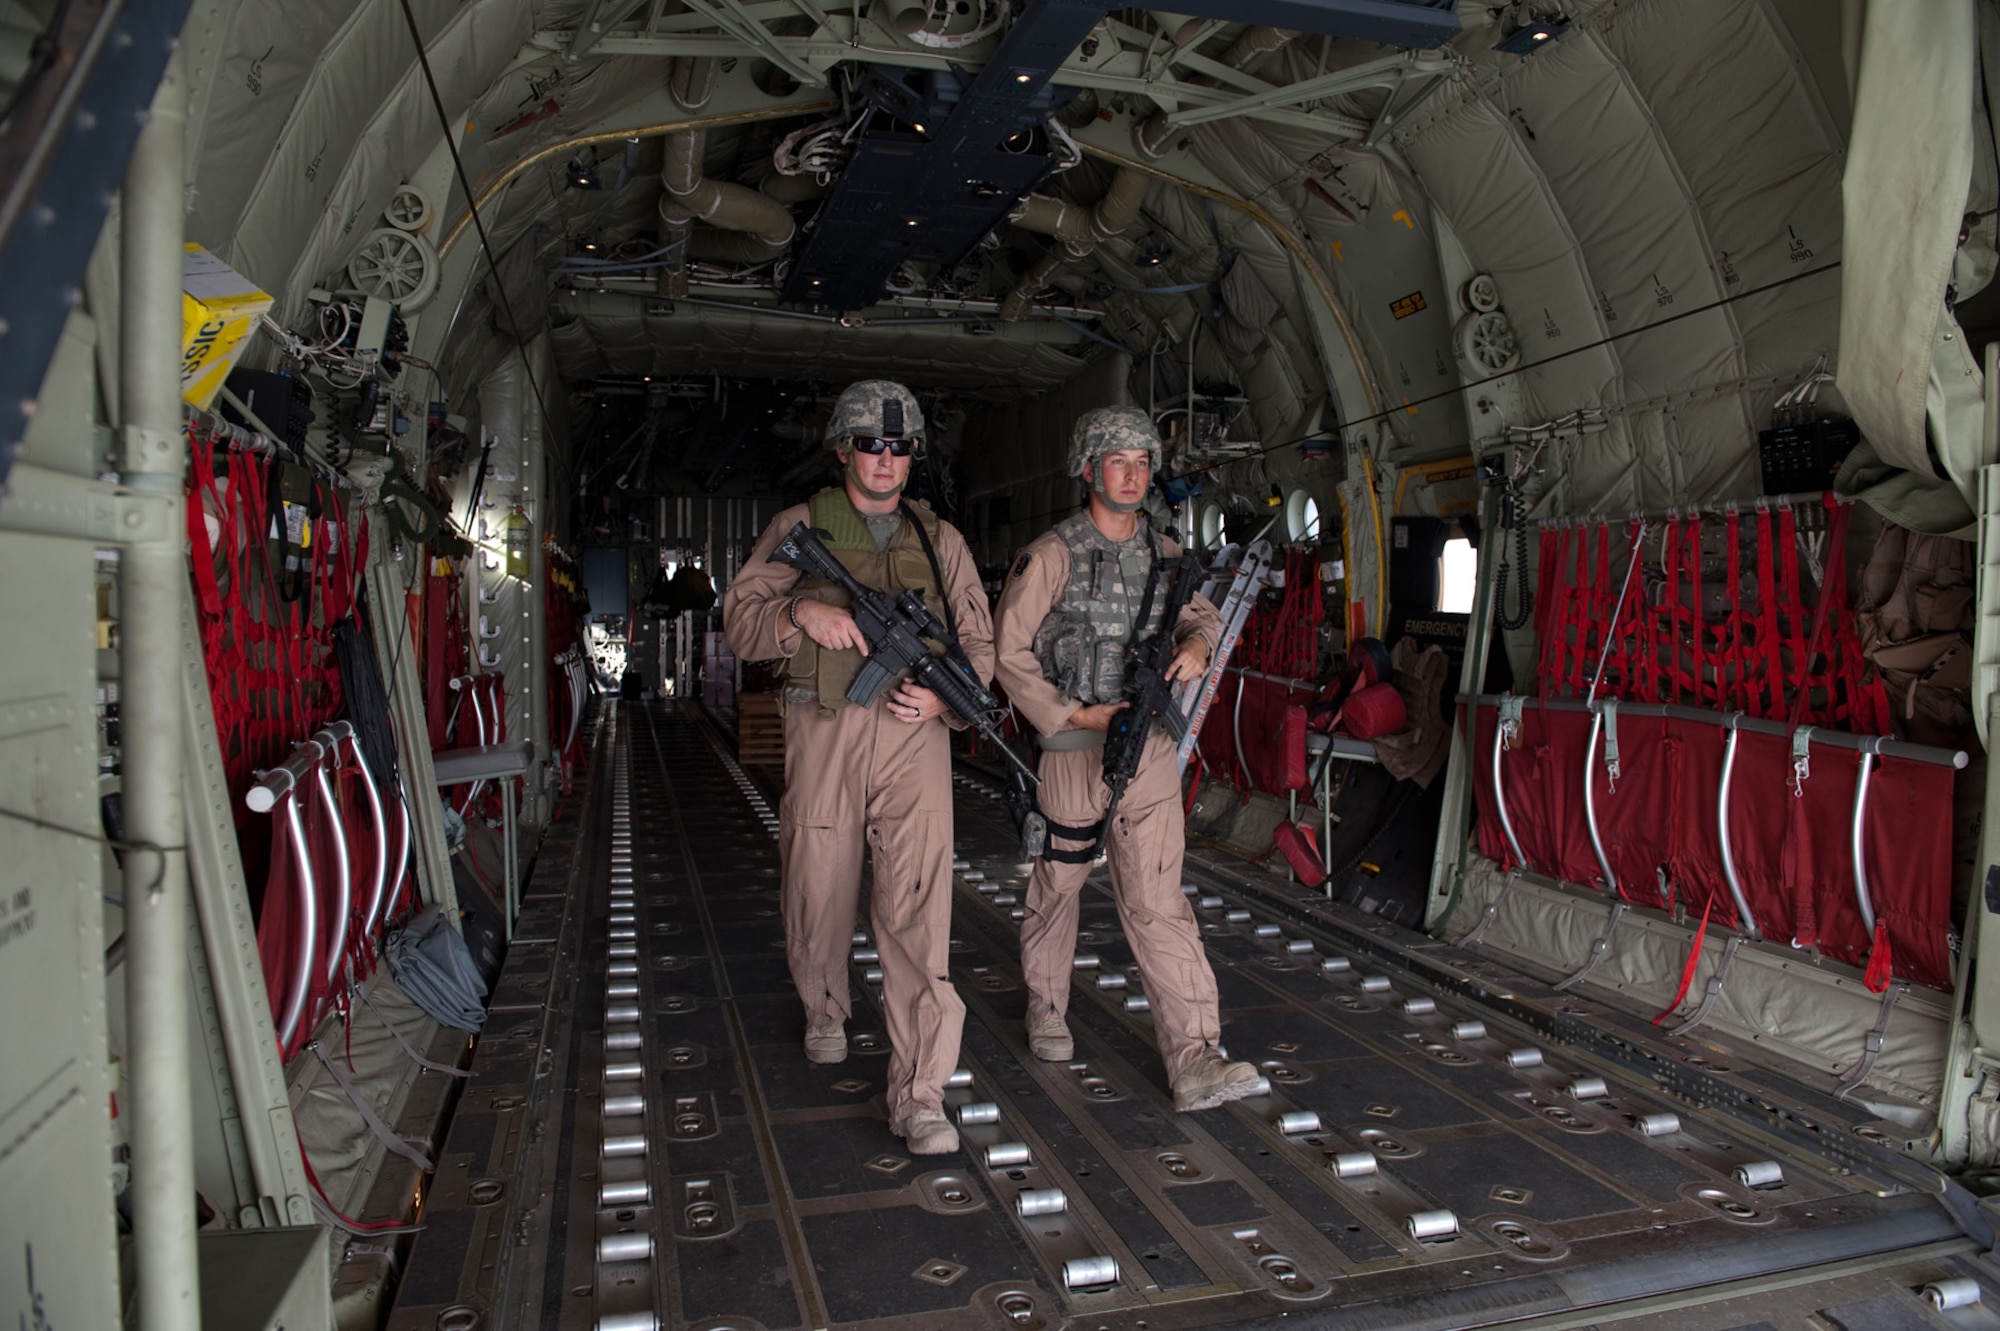 Left, U.S. Air Force Airman 1st Class Dustin Wiley and Senior Airman Brandon Owens, 379th Expeditionary Security Forces Squadron Fly Away Security Team members, exit a C-130 as they secure the area around the aircraft, Oct. 6, in Southwest Asia. Airmen Wiley and Owens ensures U.S. Air Force aircraft are secure when they travel to areas with less established security. Airman Wiley is deployed from RAF Mildenhall, England, and Airmen Owens is from Bolling Air Force Base, Washington D.C. Both are deployed in support of Operations Iraqi and Enduring Freedom. (U.S. Air Force photo/Staff Sgt. Robert Barney/RELEASED)